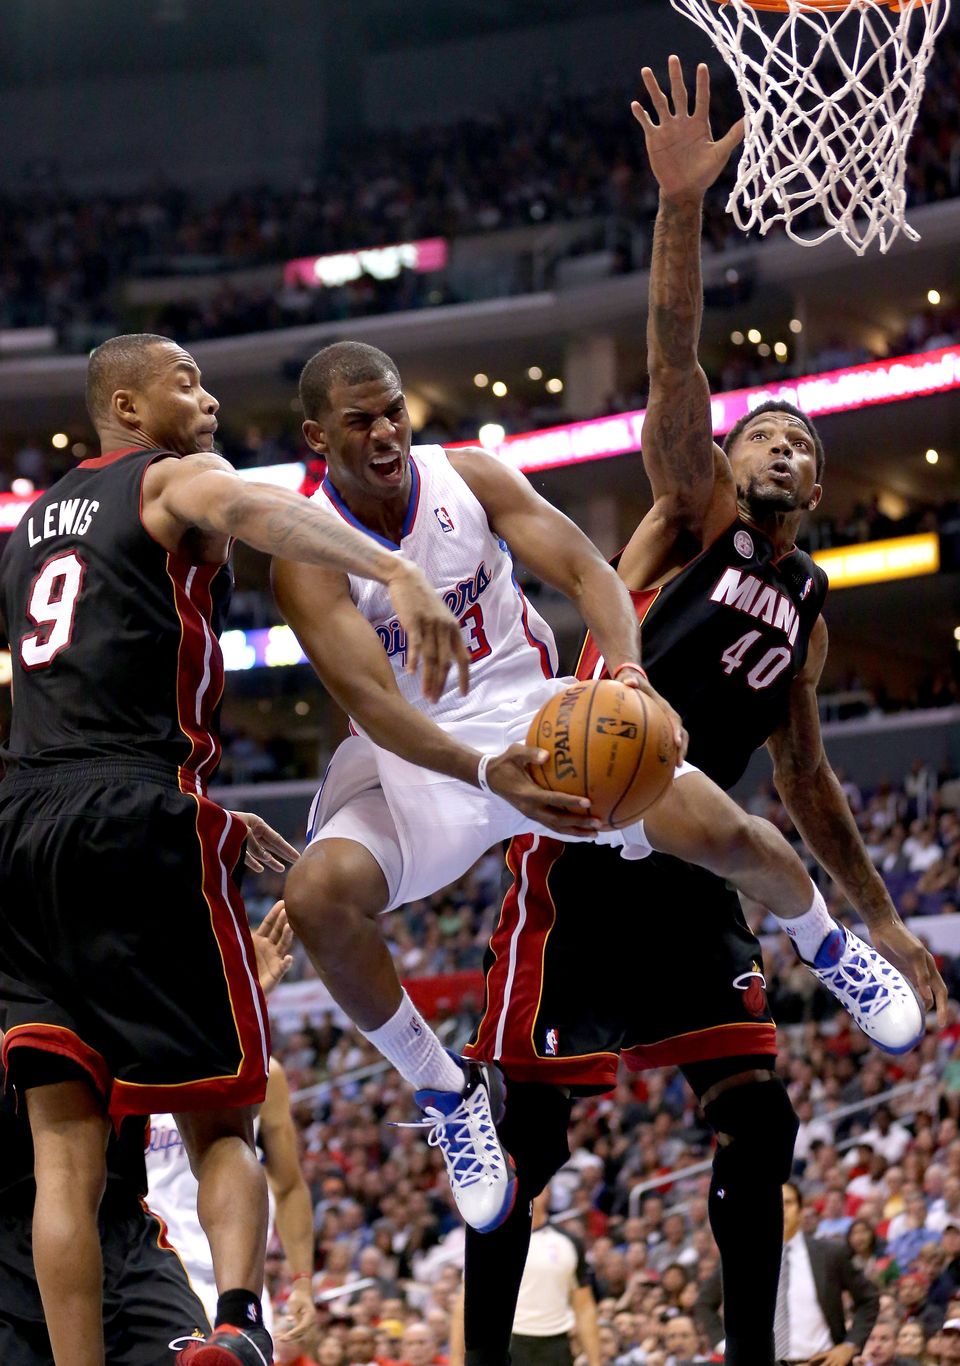 Chris Paul, Los Angeles Clippers